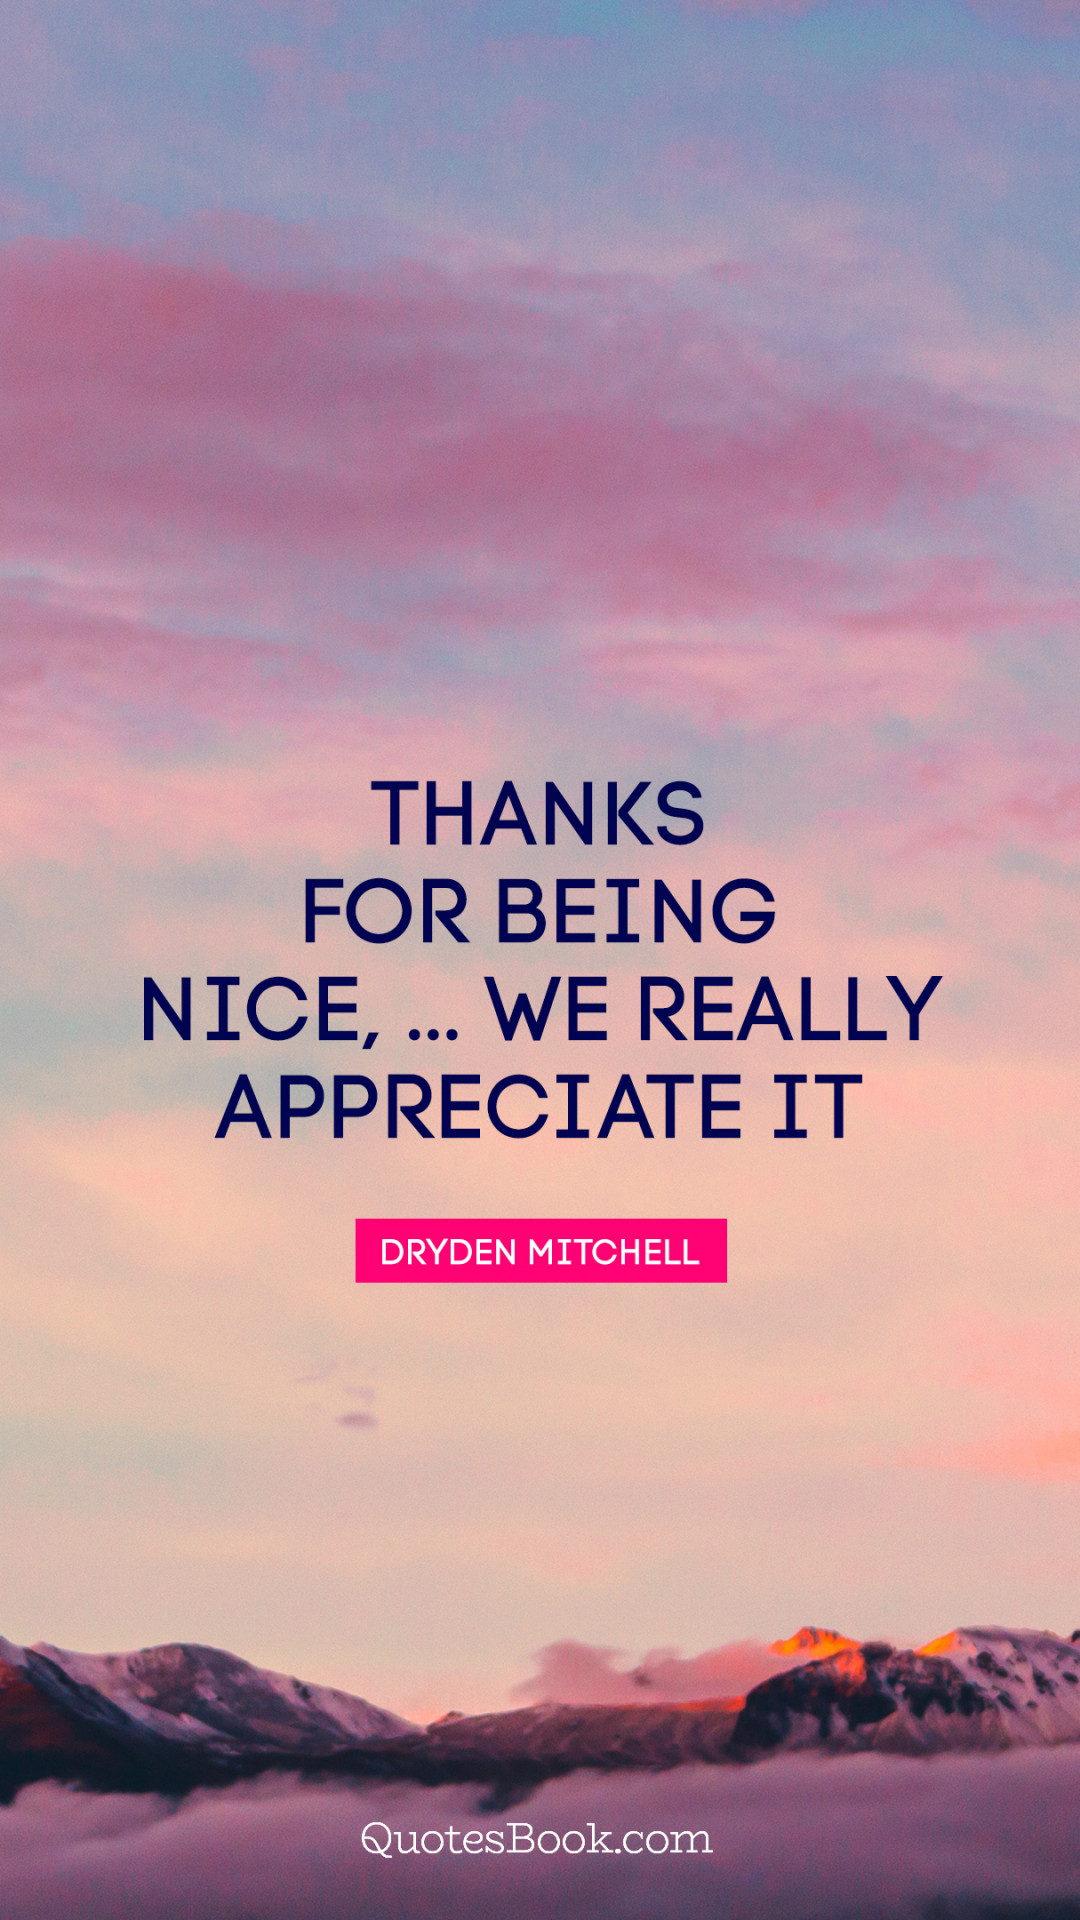 Thanks for being nice, We really appreciate it. - Quote by Dryden